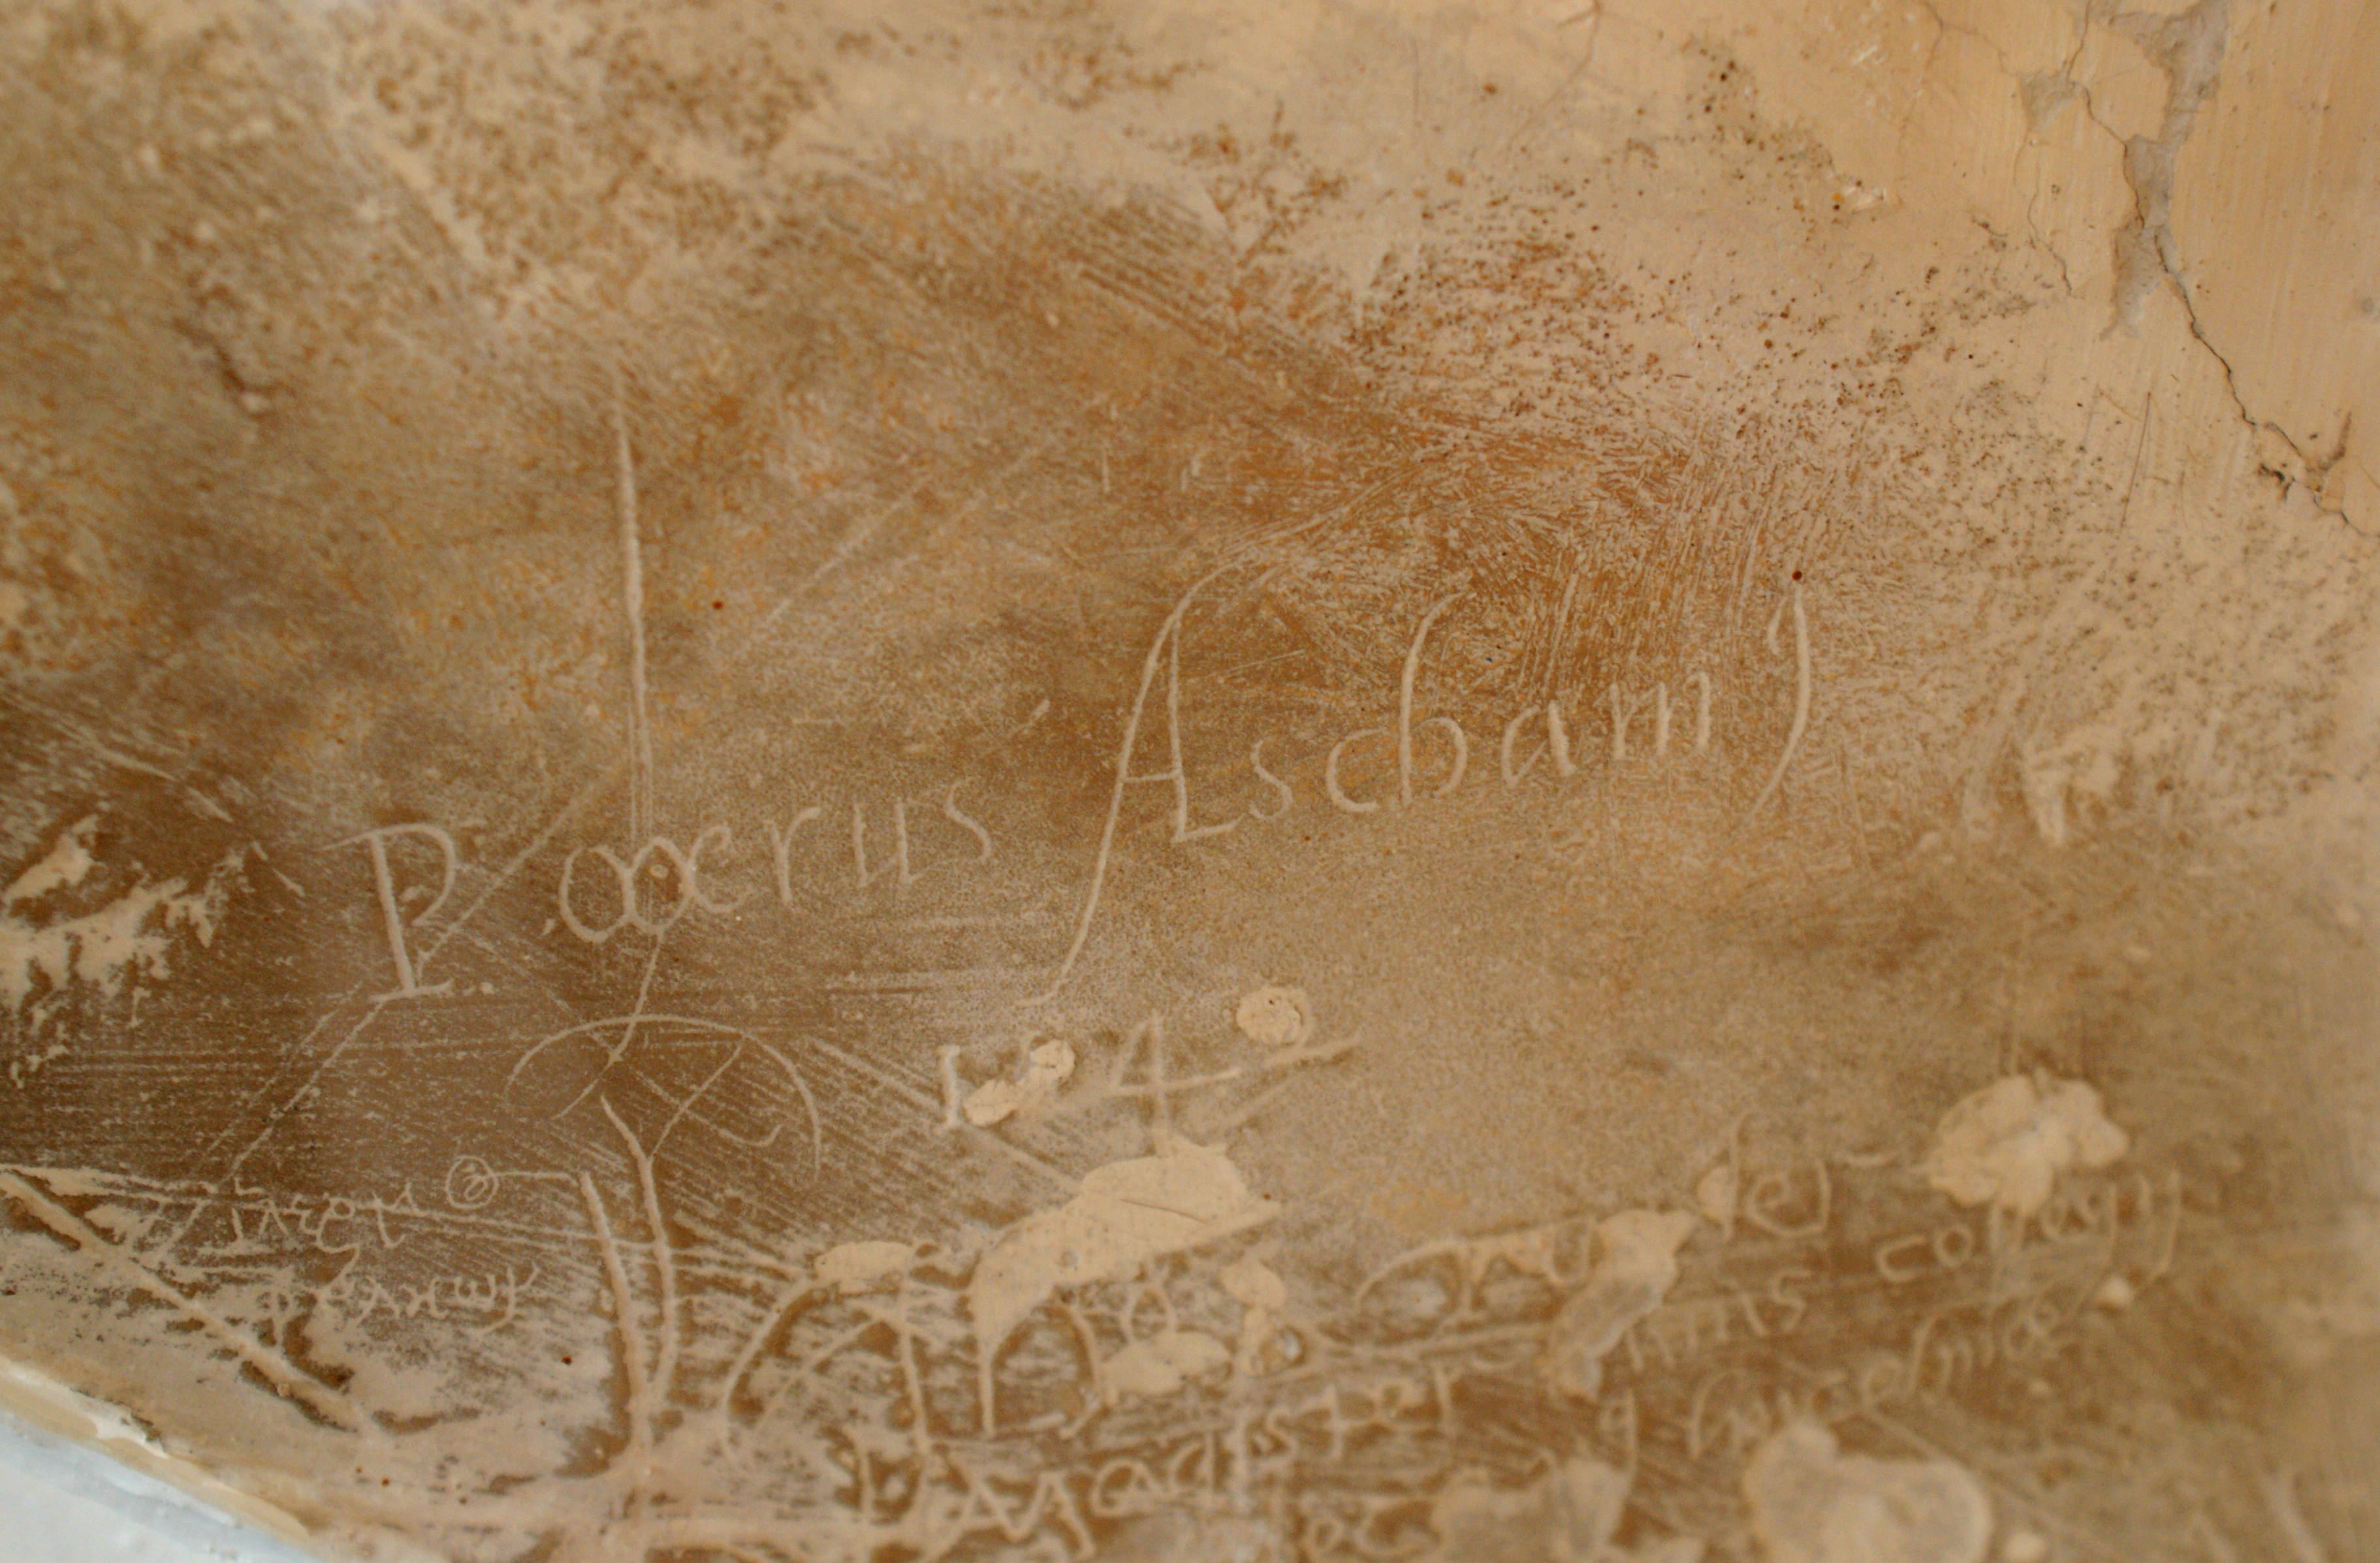 Roger Ascham's signature in the stone of the Old Treasury fireplace